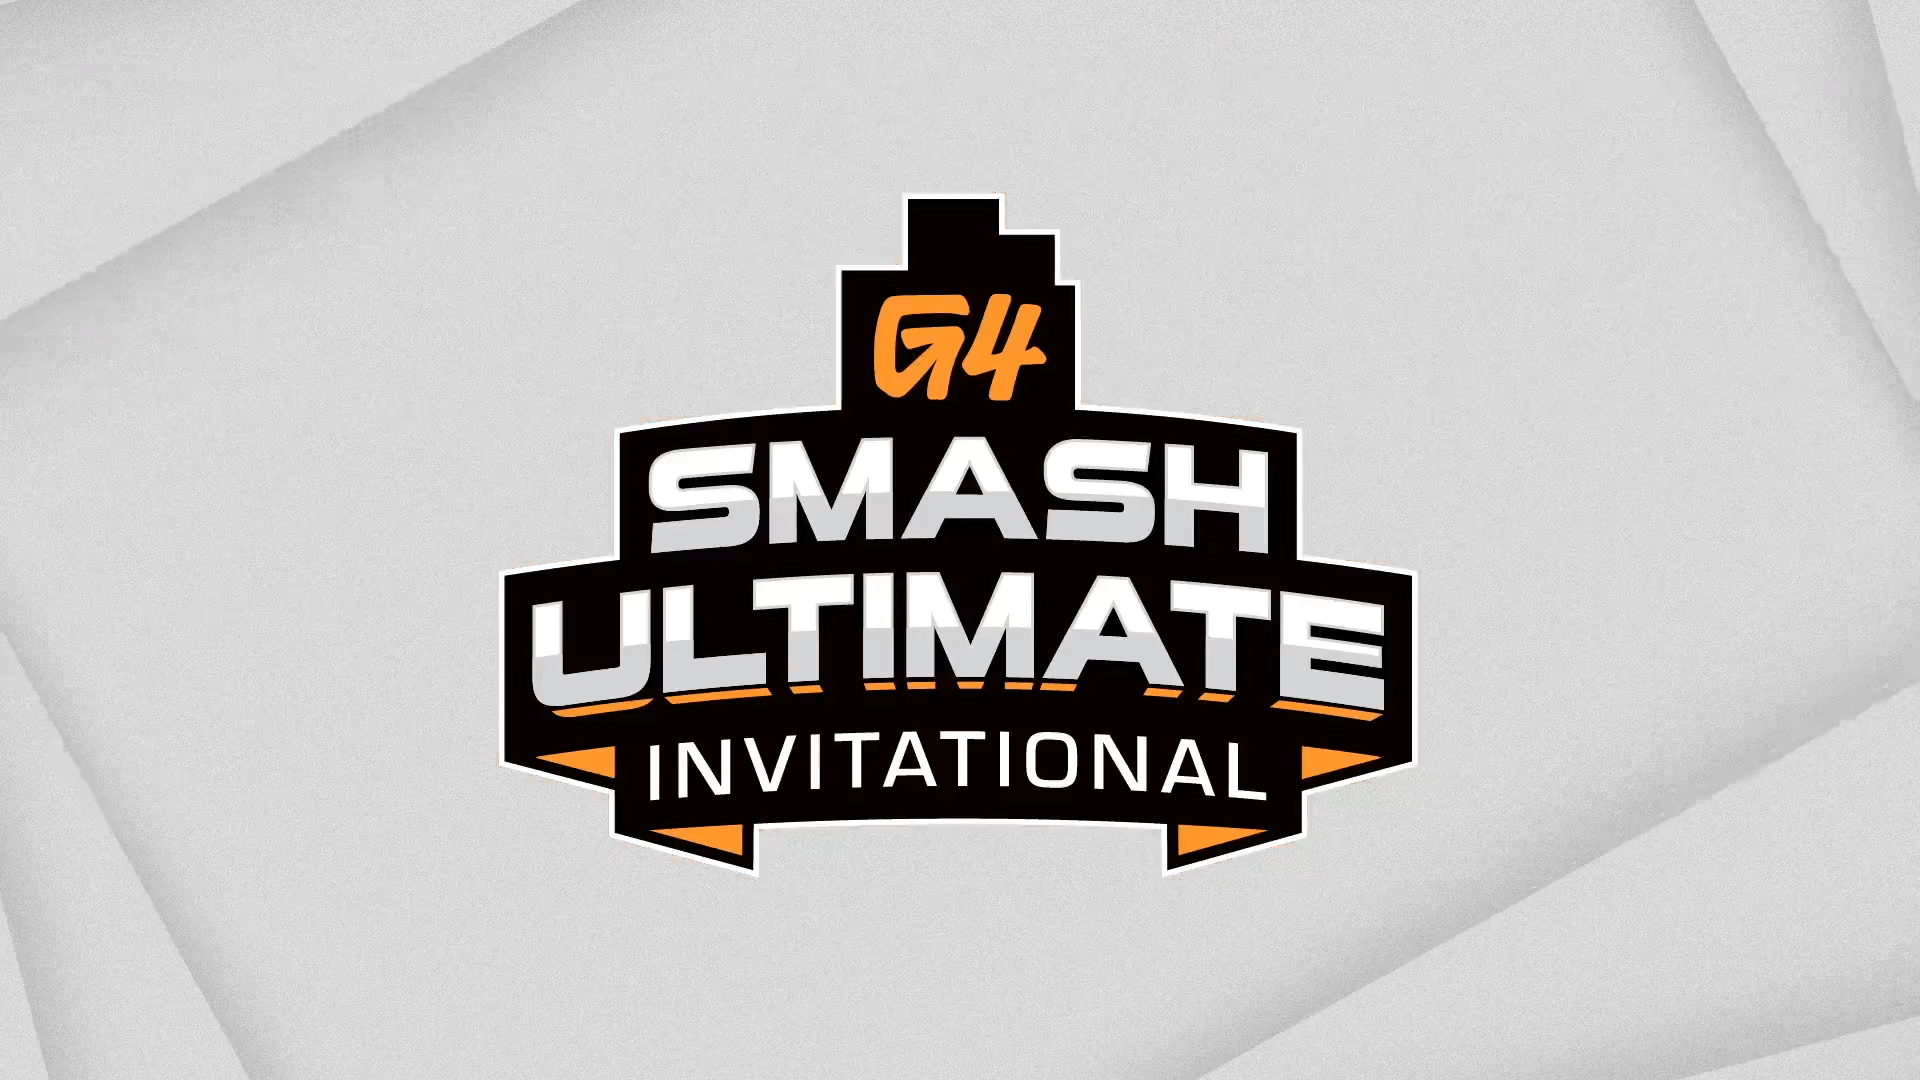 Top Matches of G4 Smash Ultimate Invitational